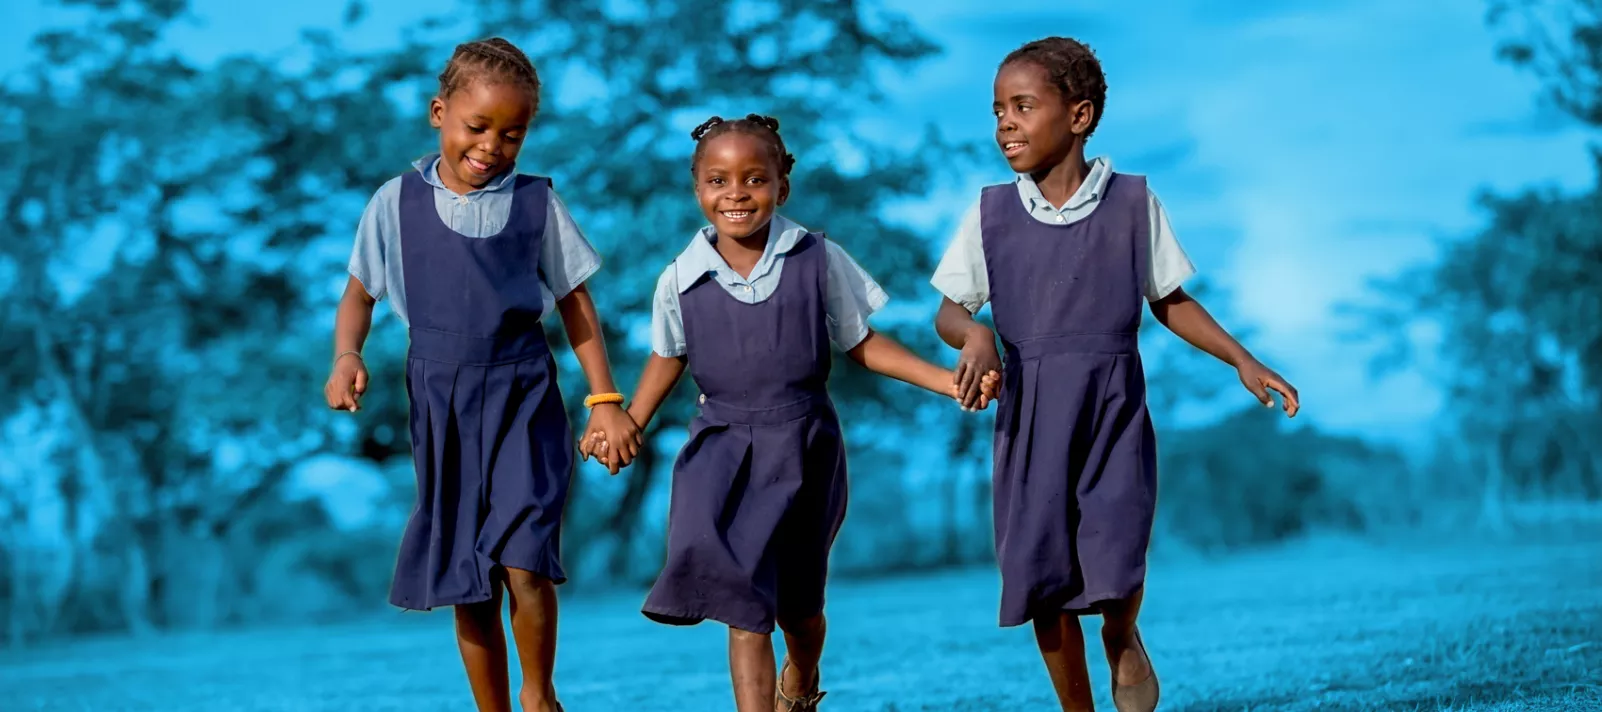 Young girls hold hands while playing outdoors at Chimowa Primary School in Monze, Zambia.